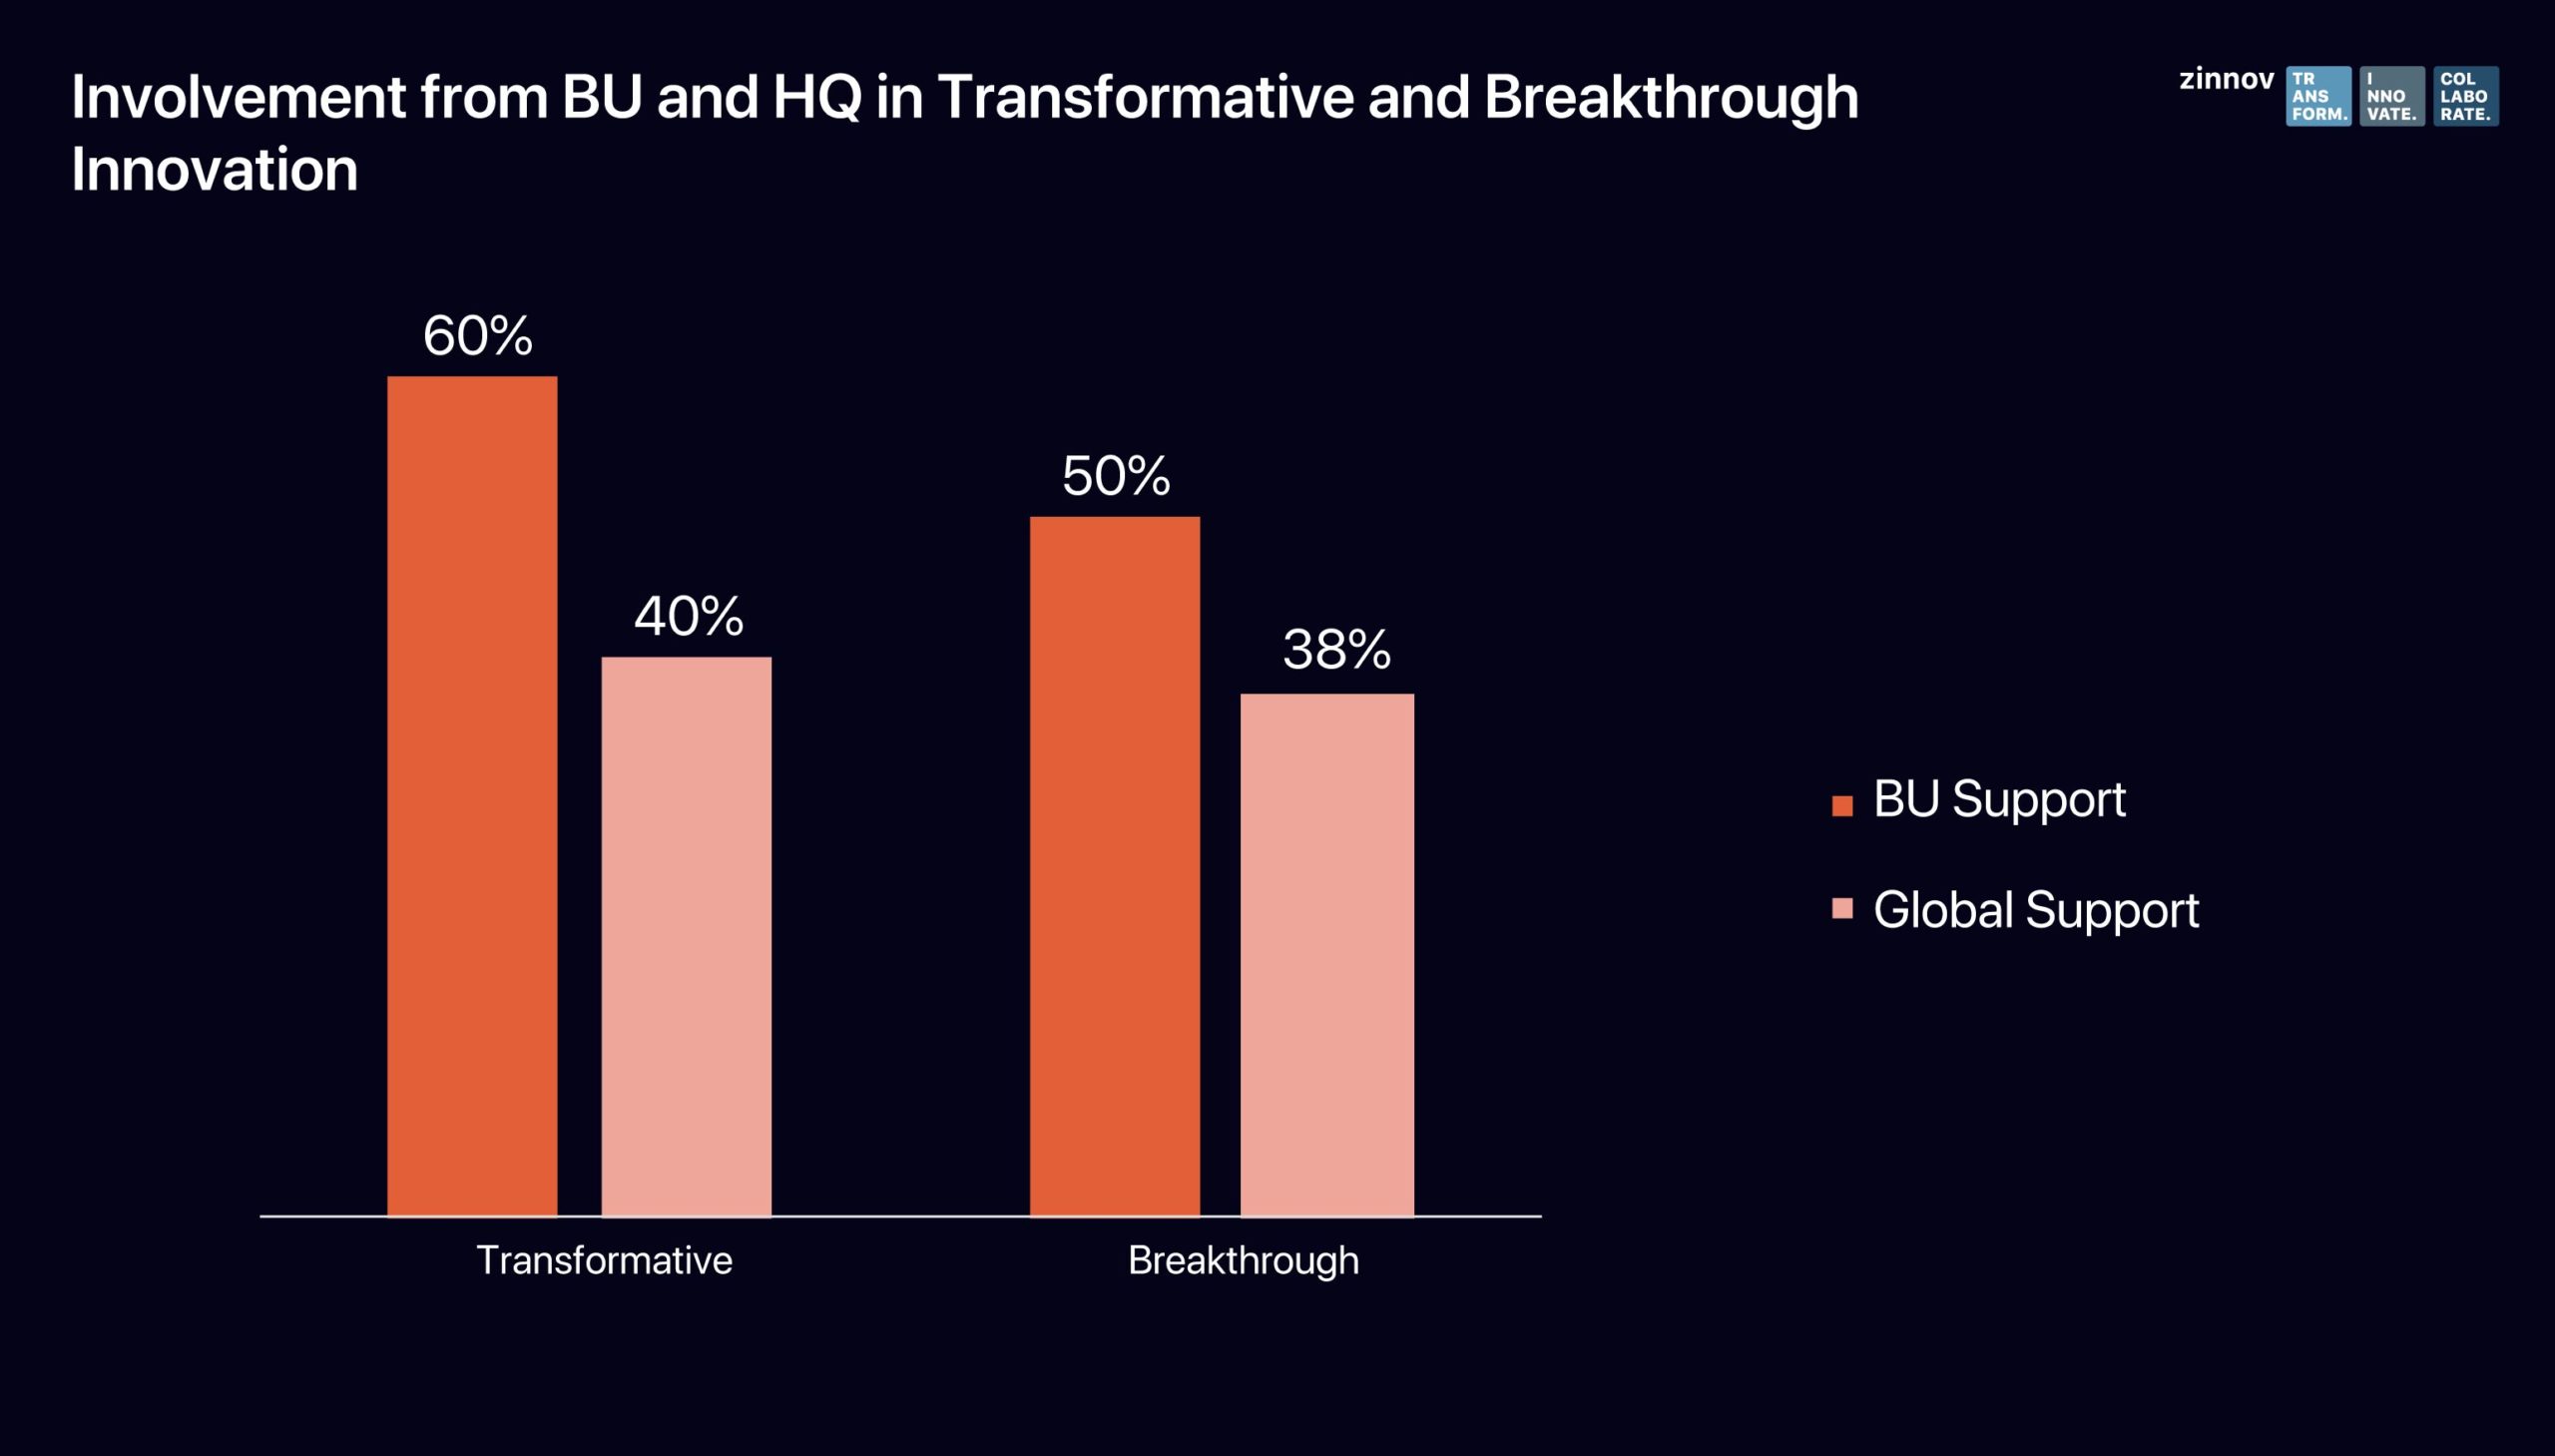 Involvement from BU and HQ in transformation and breakdown